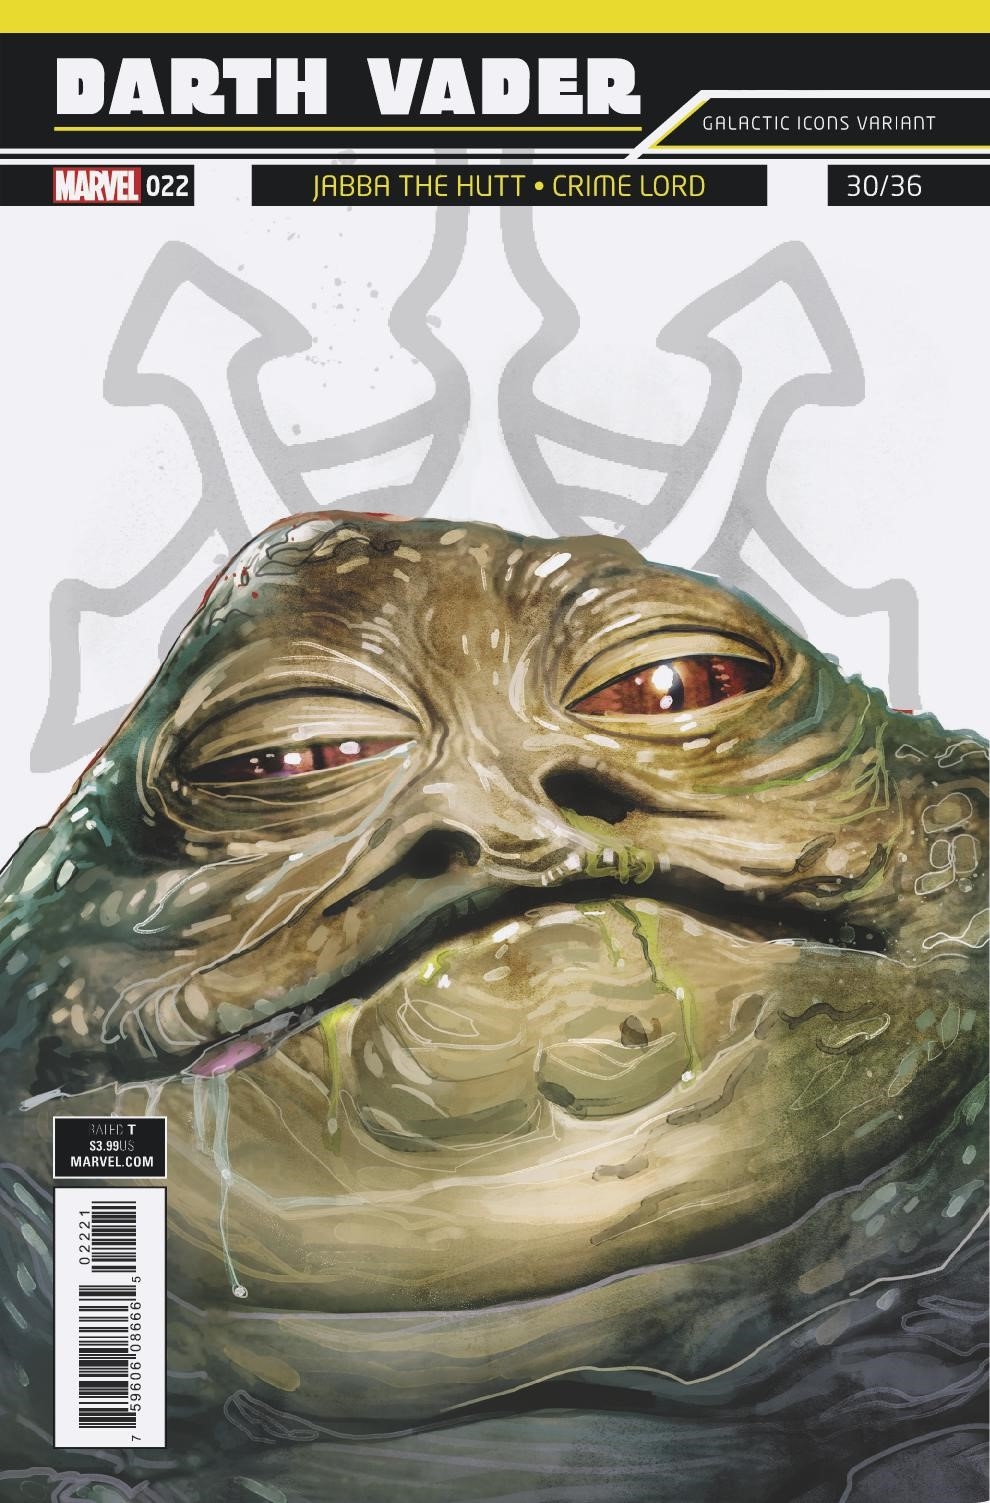 Darth Vader #22 (Rod Reis Galactic Icon "Jabba the Hutt" Variant Cover) (17.10.2018)